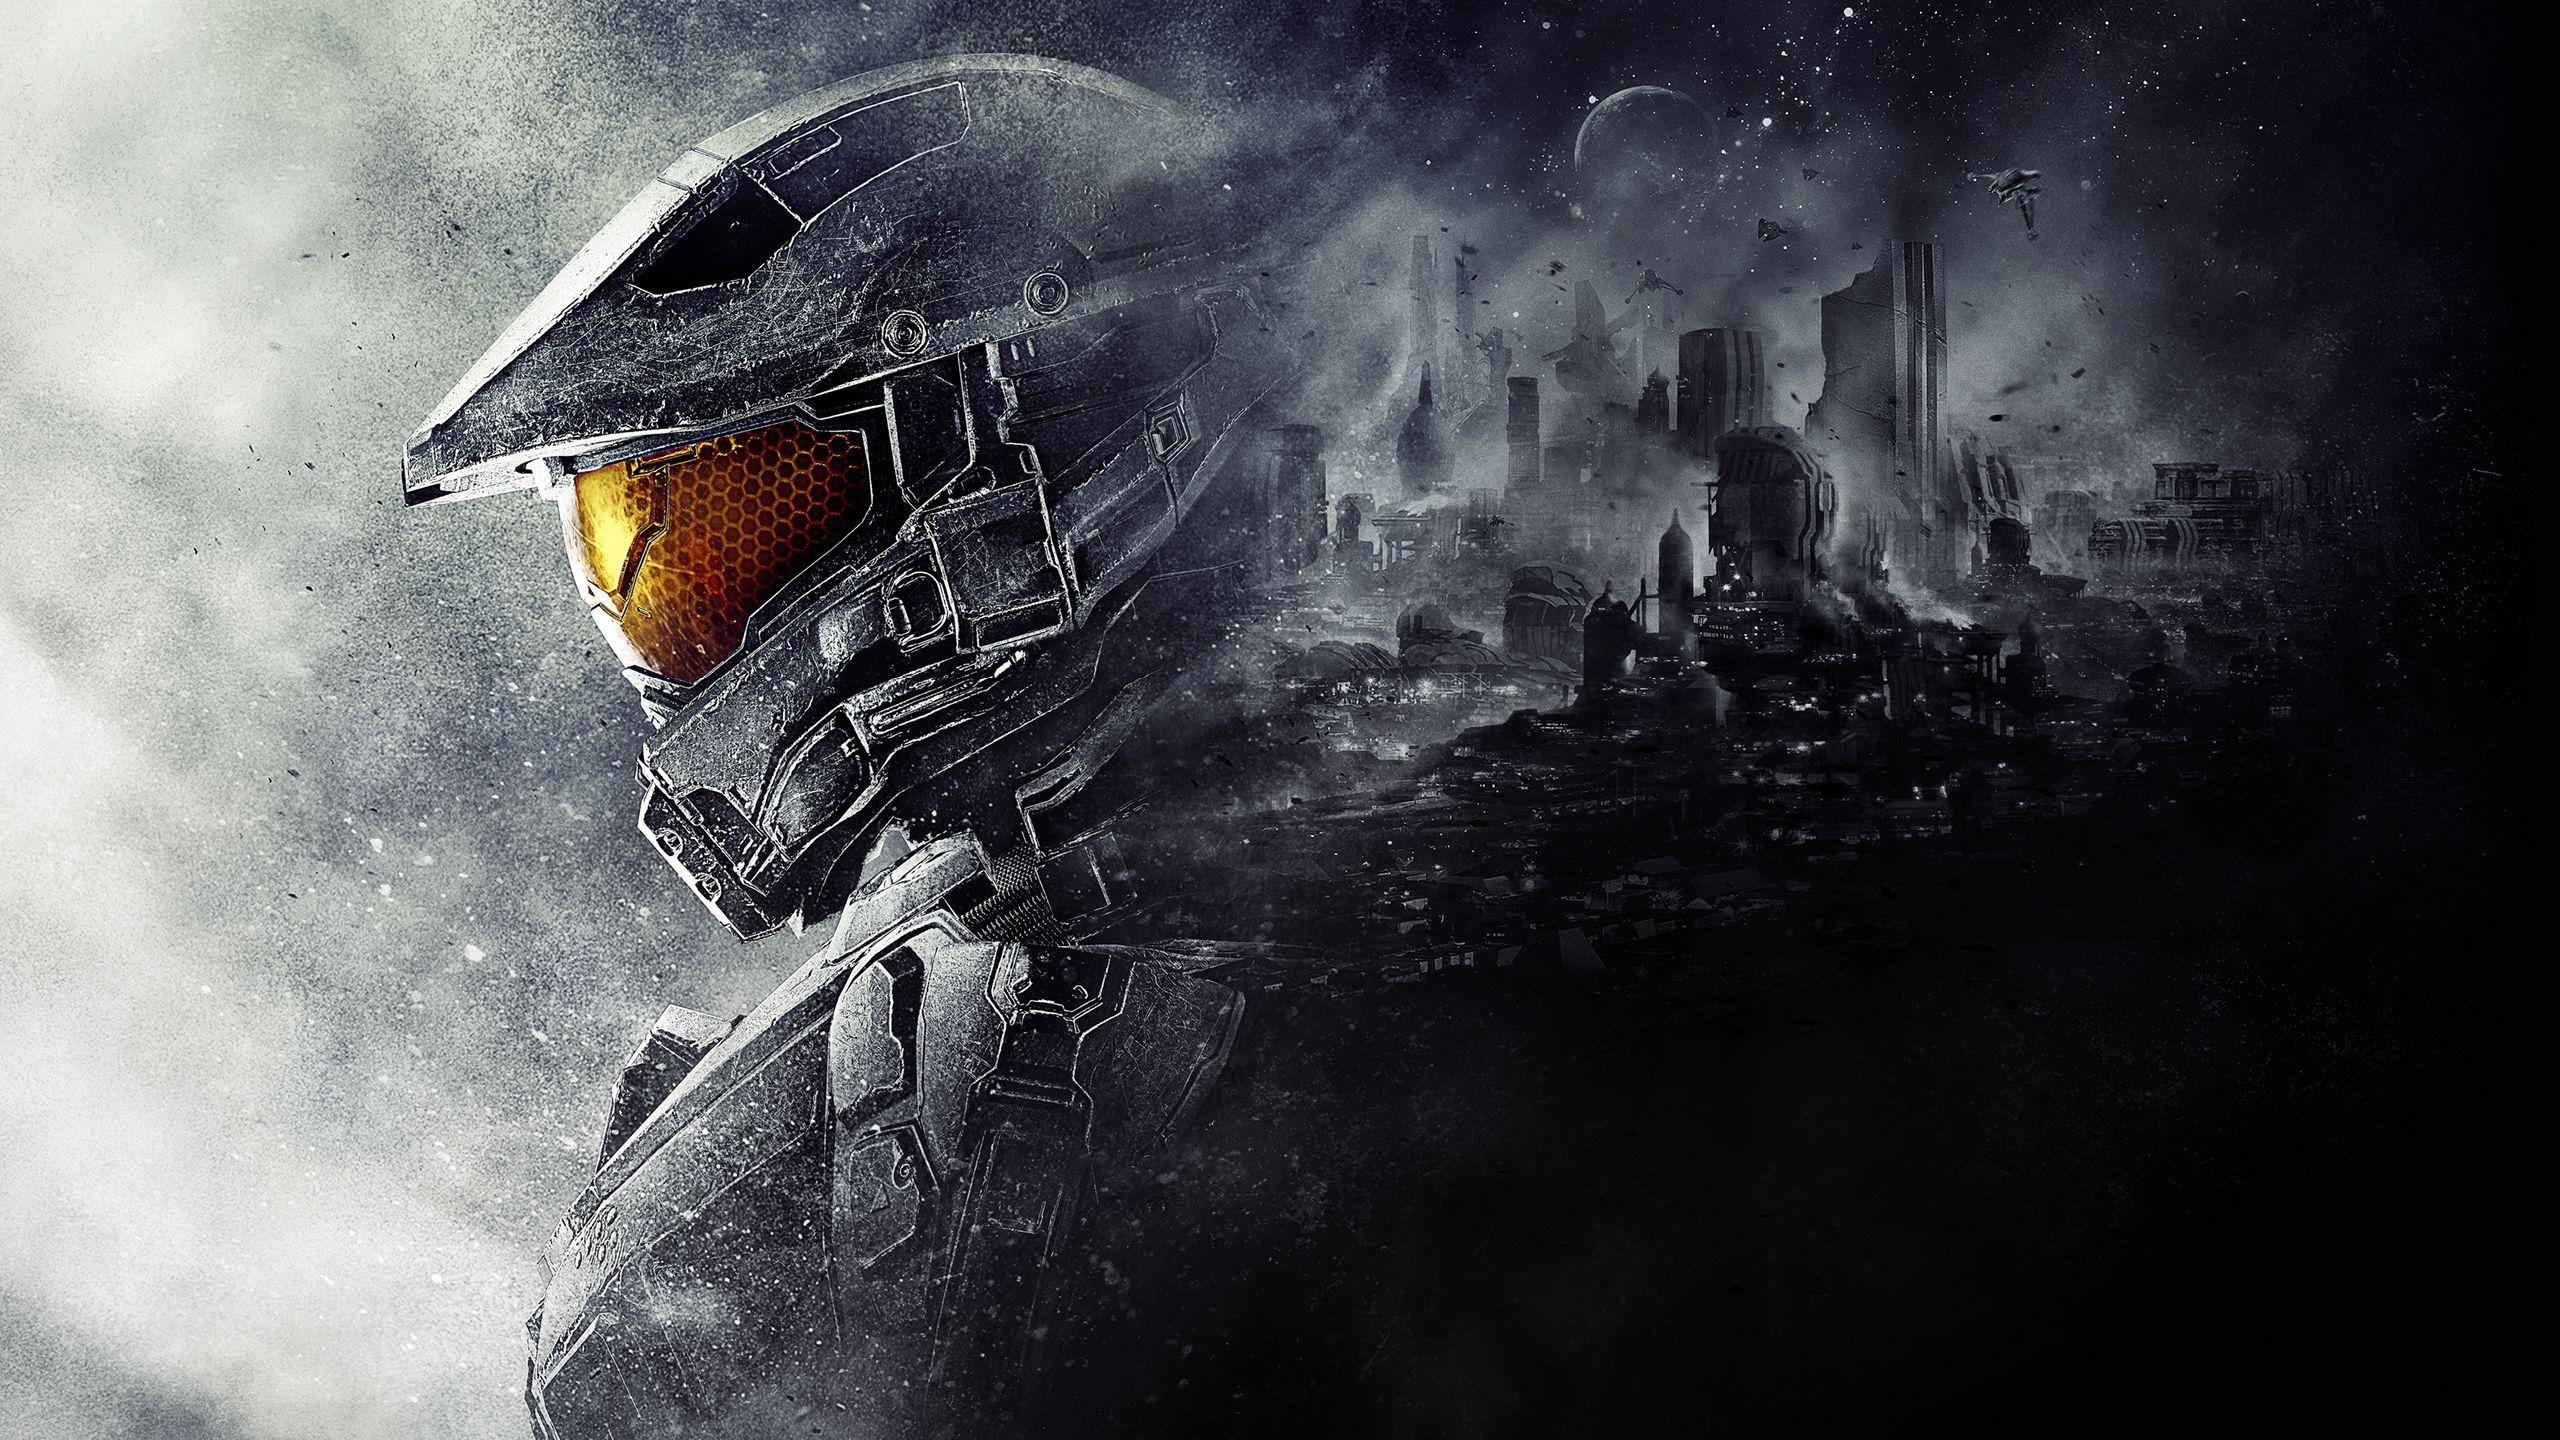 Master Chief Halo 5 Guardians Wallpapers HD Backgrounds